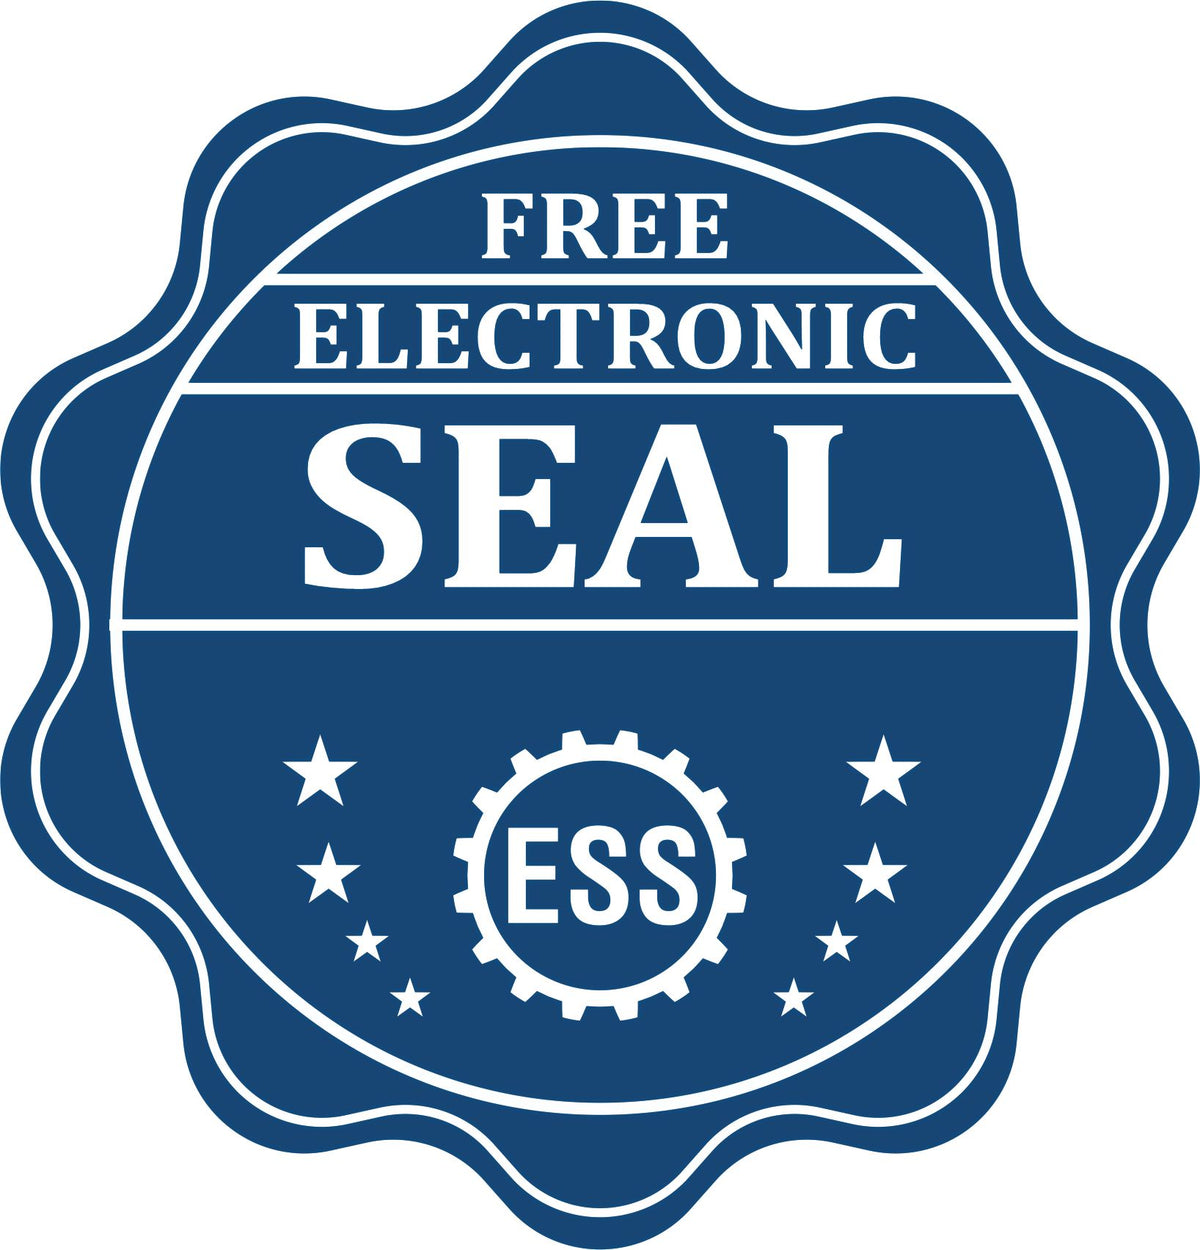 A badge showing a free electronic seal for the Slim Pre-Inked Louisiana Professional Geologist Seal Stamp with stars and the ESS gear on the emblem.